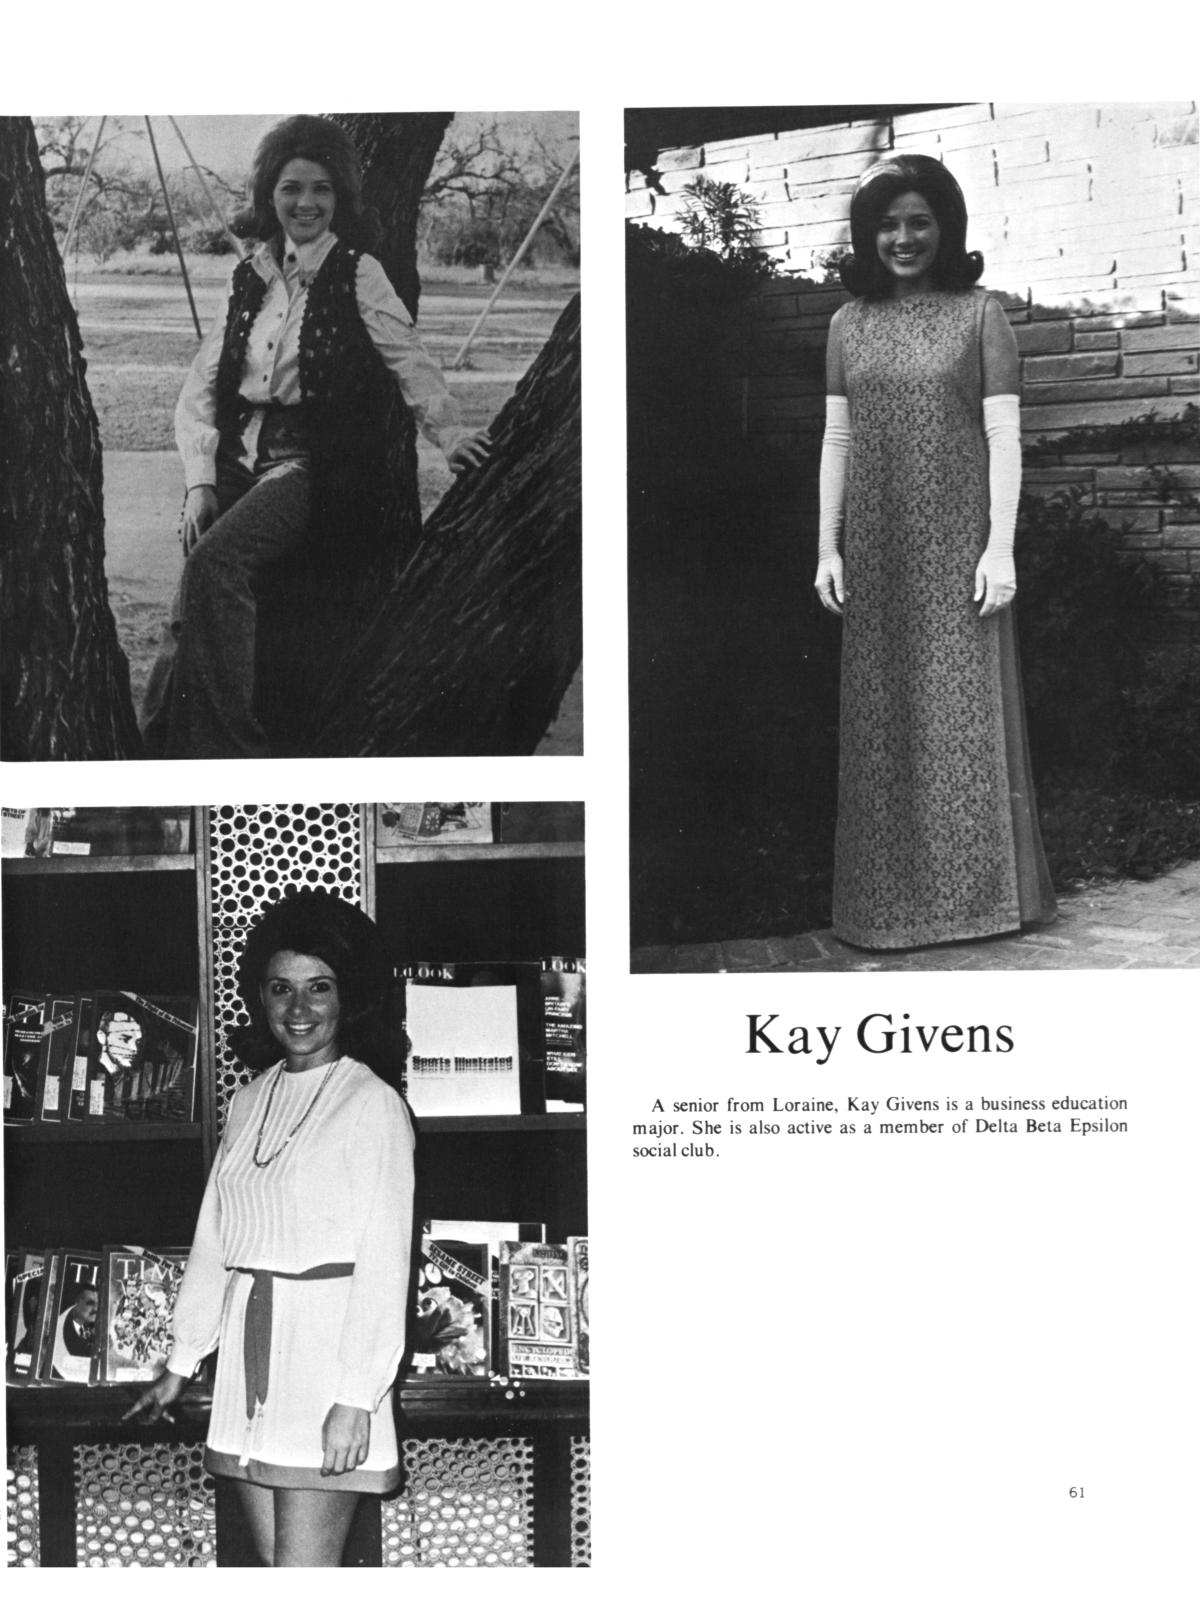 The Totem, Yearbook of McMurry College, 1971
                                                
                                                    61
                                                